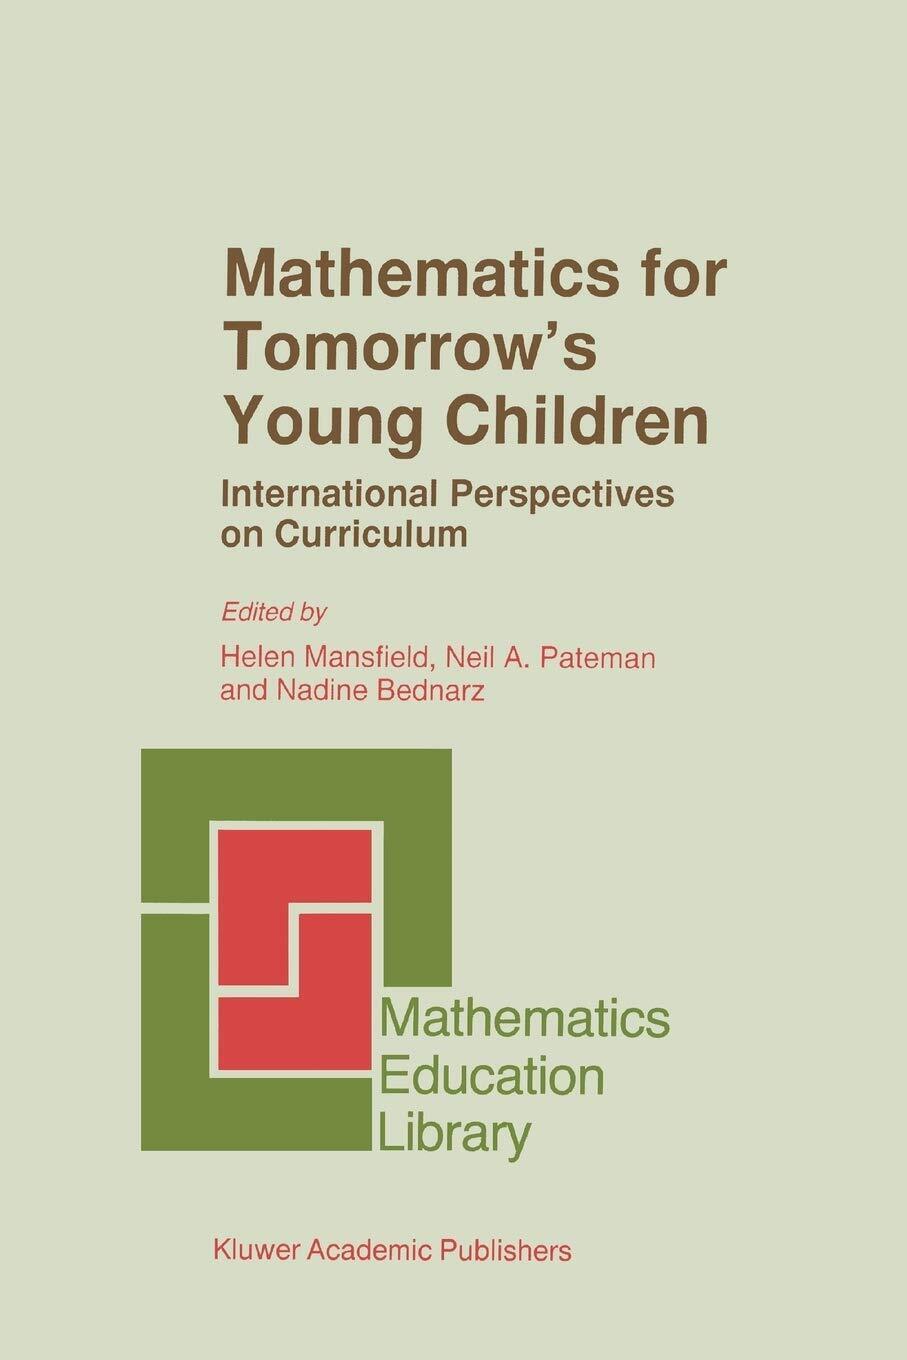 Mathematics for Tomorrow's Young Children - C. S. Mansfield - Springer, 2010